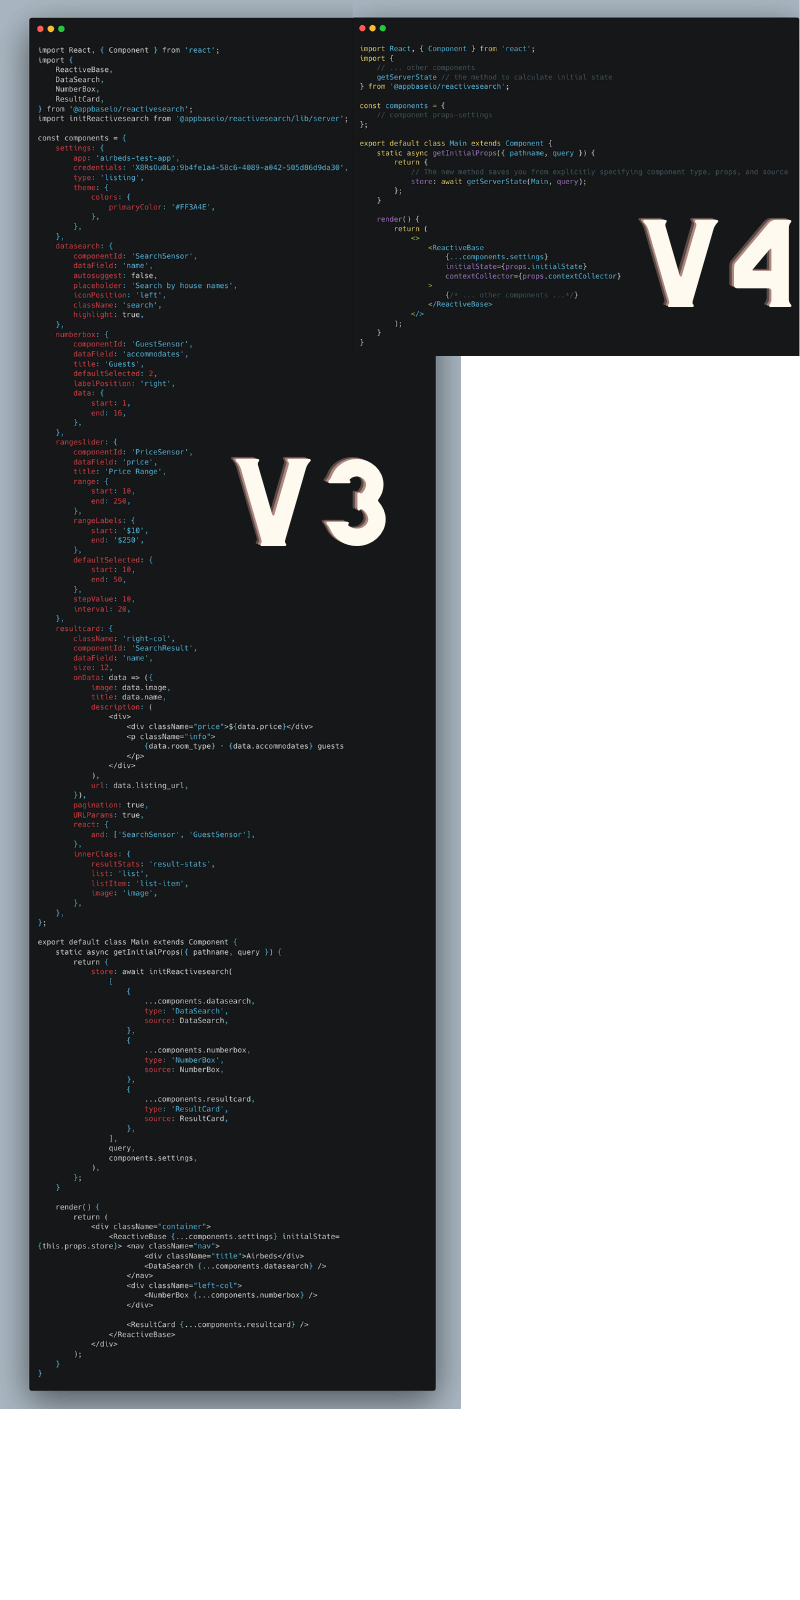 A comparison of SSR config required for v3 as compared to v4